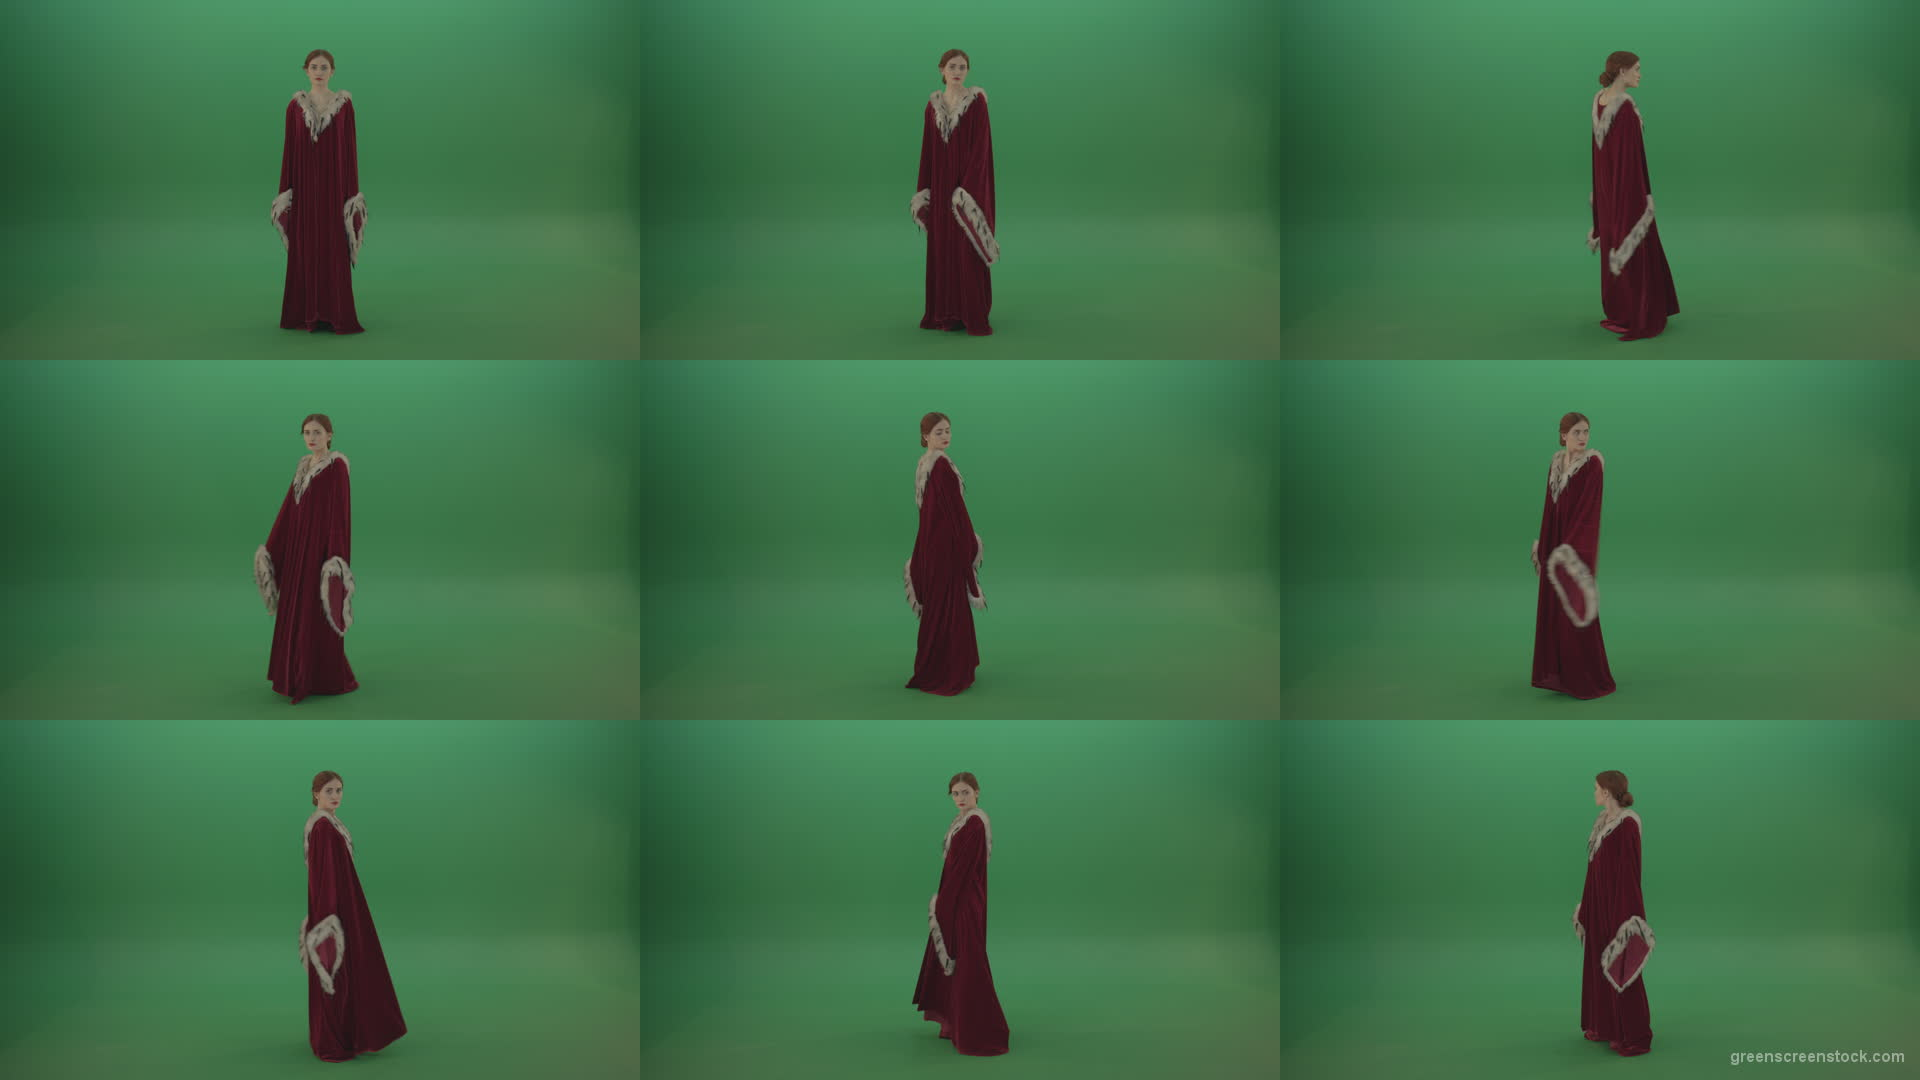 Princess-twists-around-in-a-circle-and-elegantly-dances Green Screen Stock